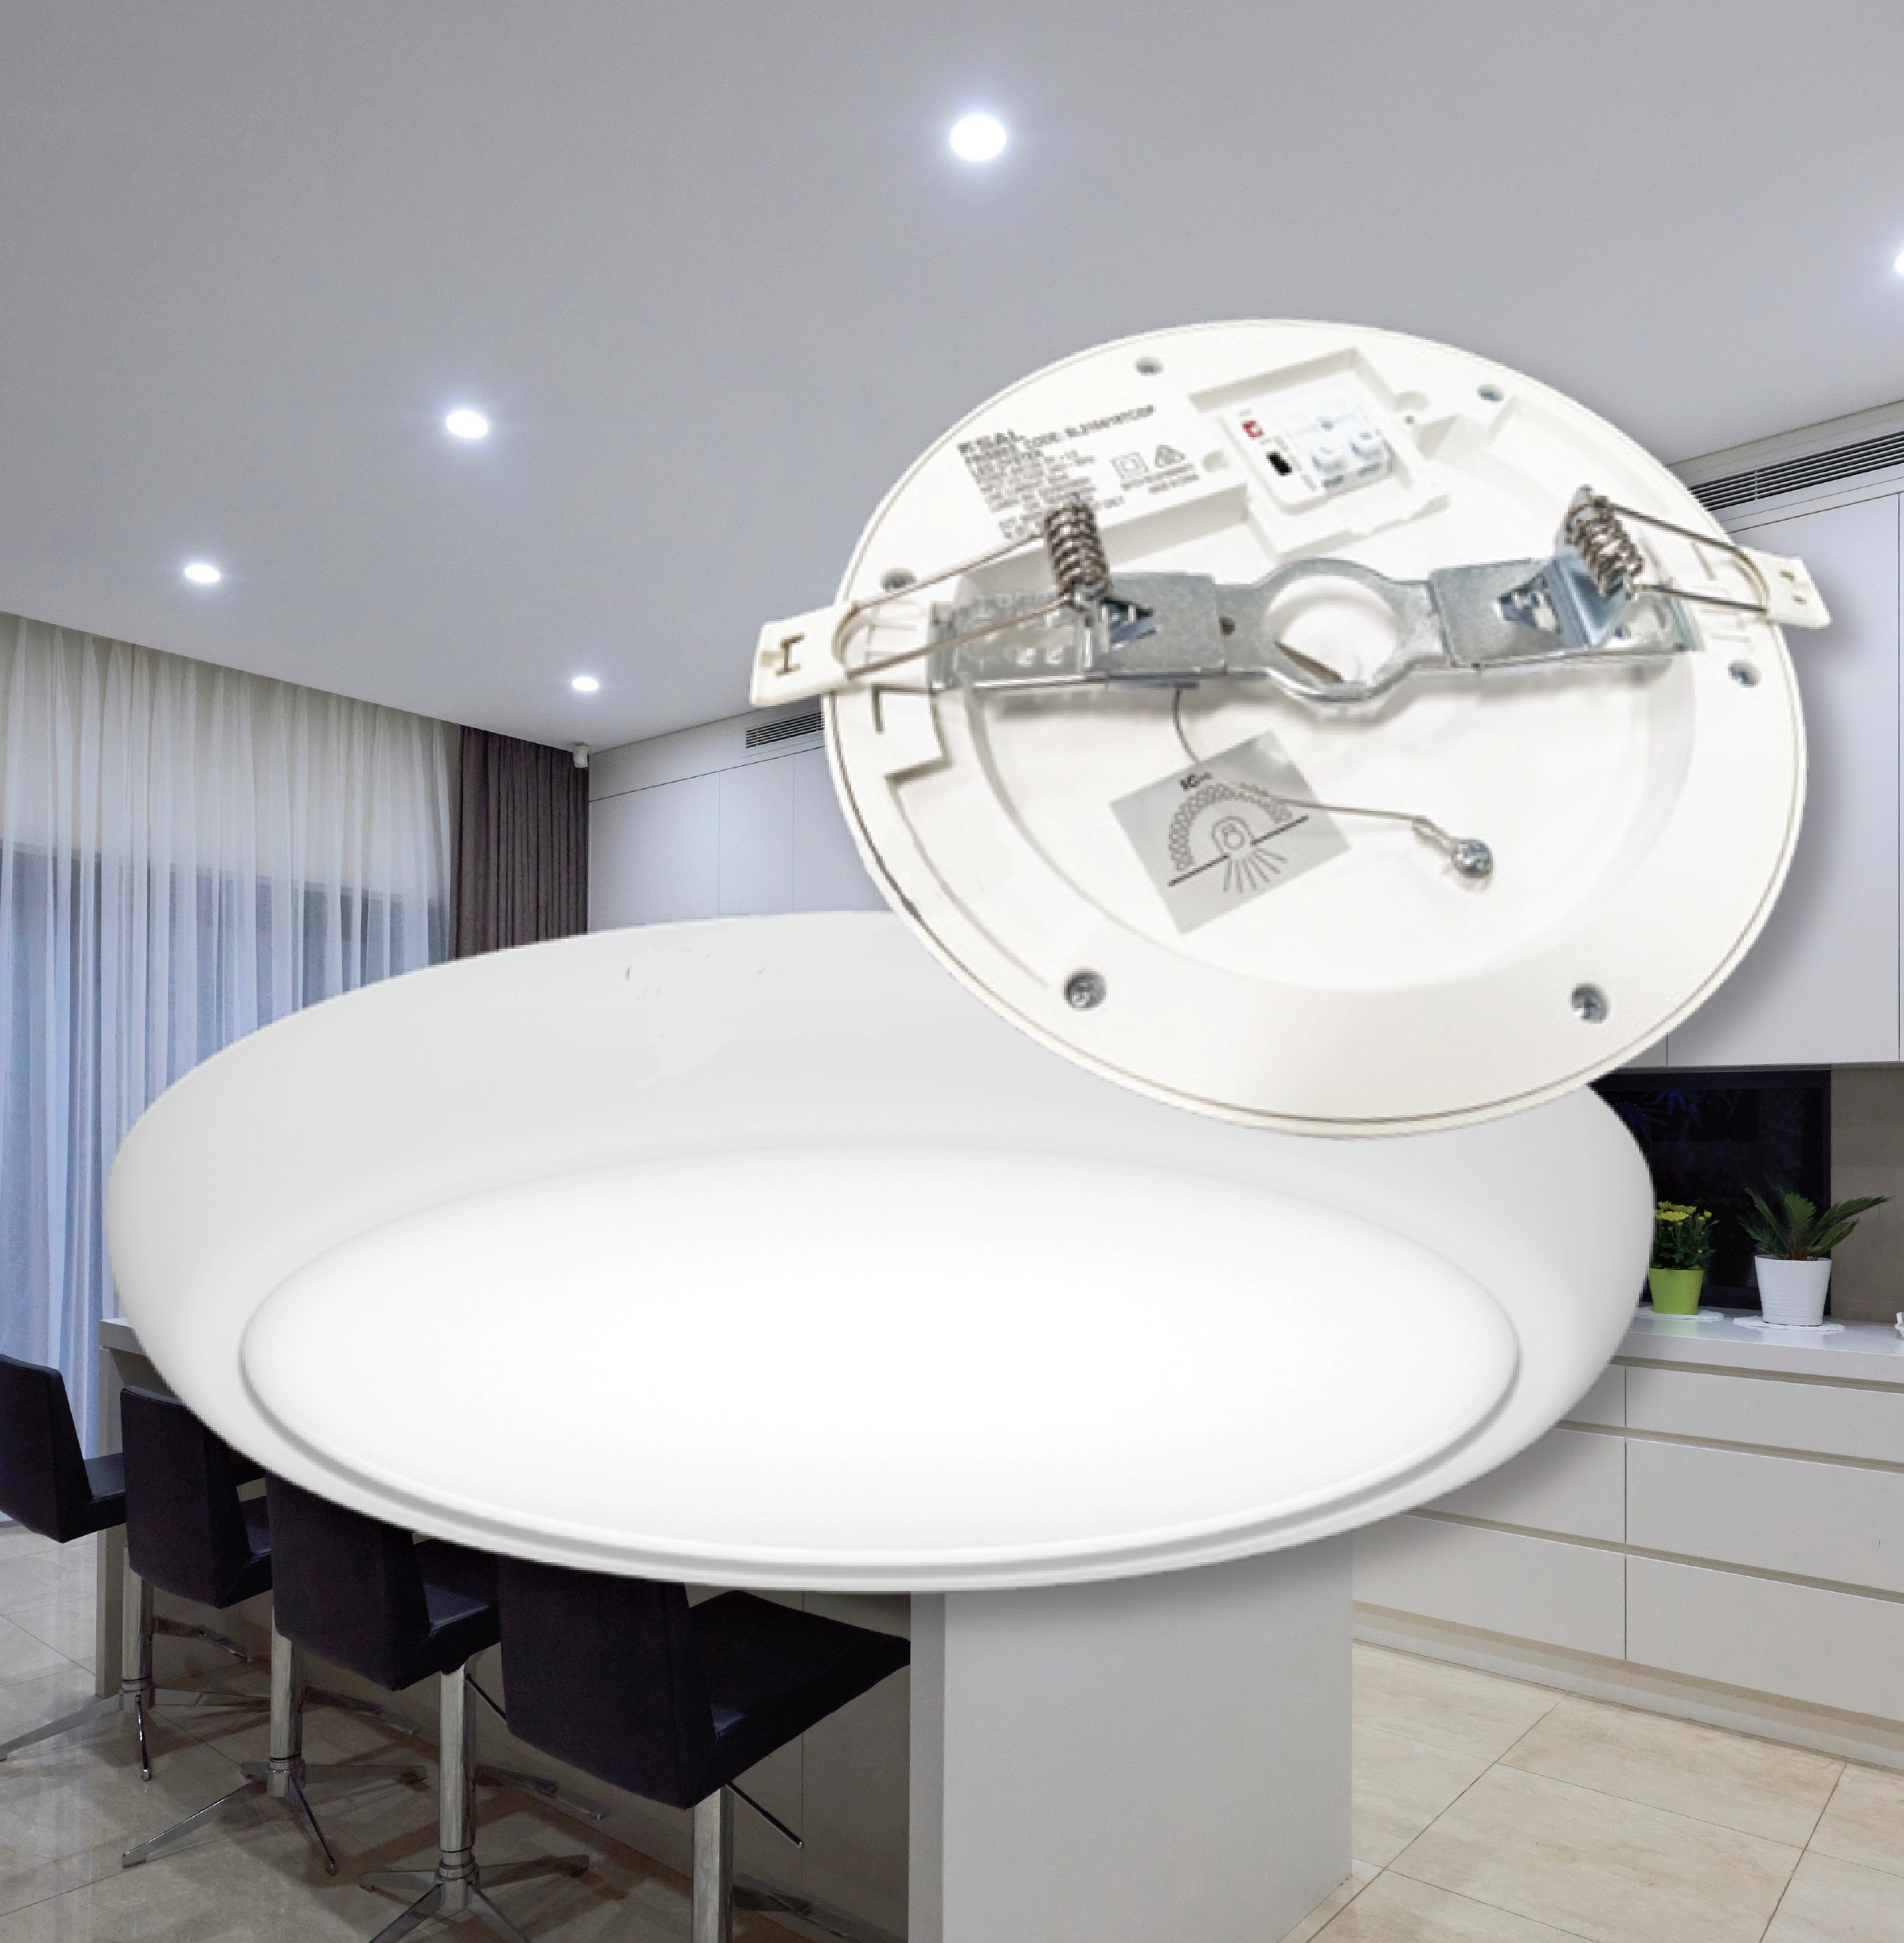 Introducing the SL2104 Frisbee range of luminaires from SAL.